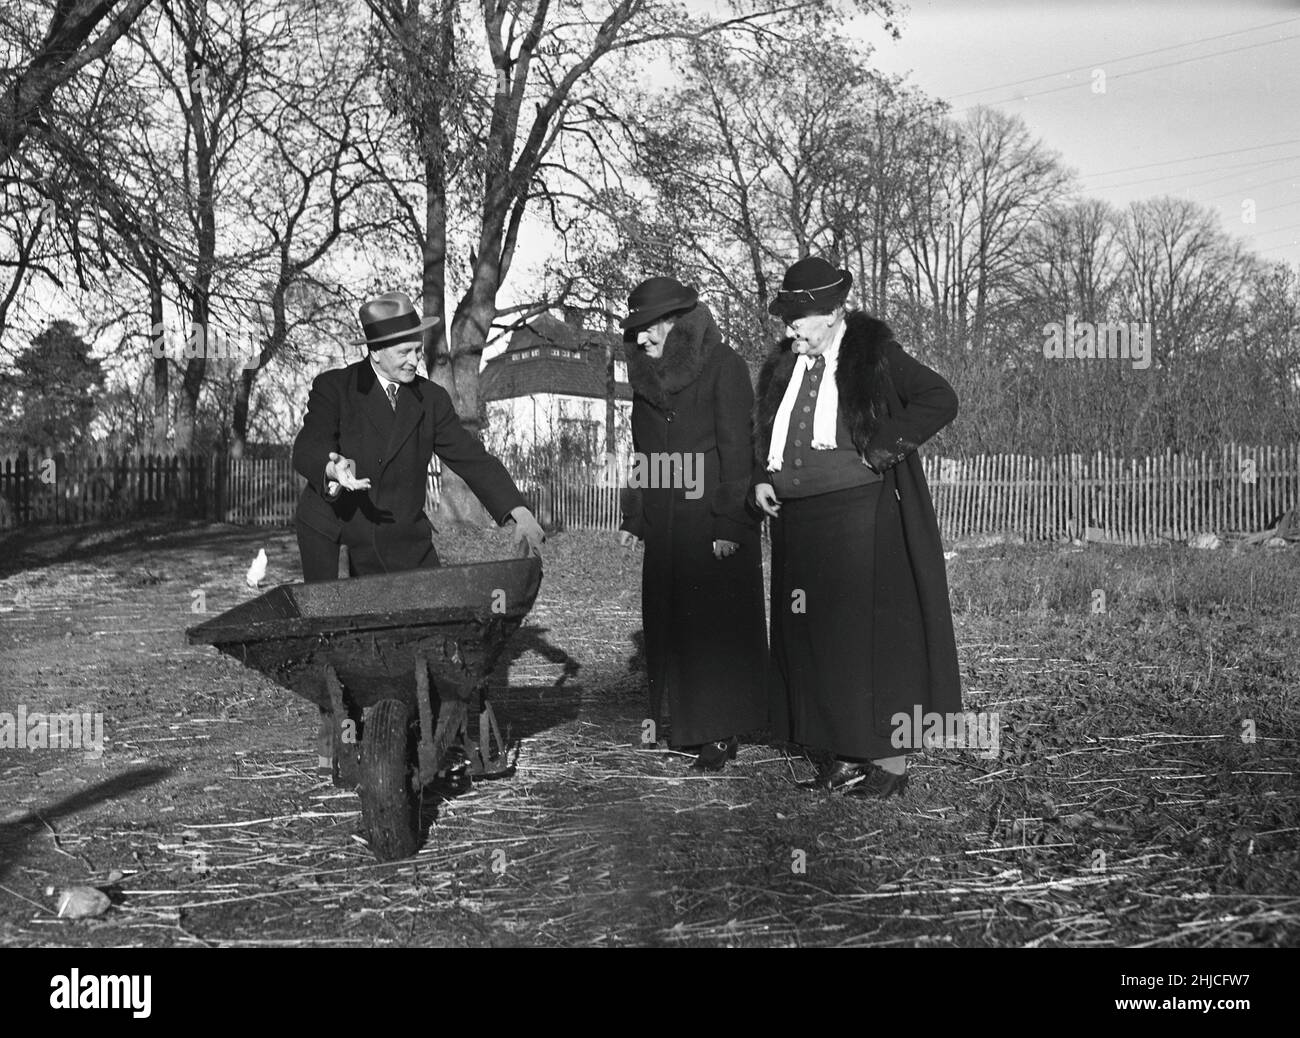 Having fun in the 1930s. An elderly man offers his equally old lady friends a ride in his wheelbarrow. They look somewhat reluctant to take on his offer. It's Lars-August Lundmark, Olivia Svensson and Alina Bodin at a home for elderly actors outside Stockholm.  Sweden 1939. Kristofferson ref 39-11 Stock Photo